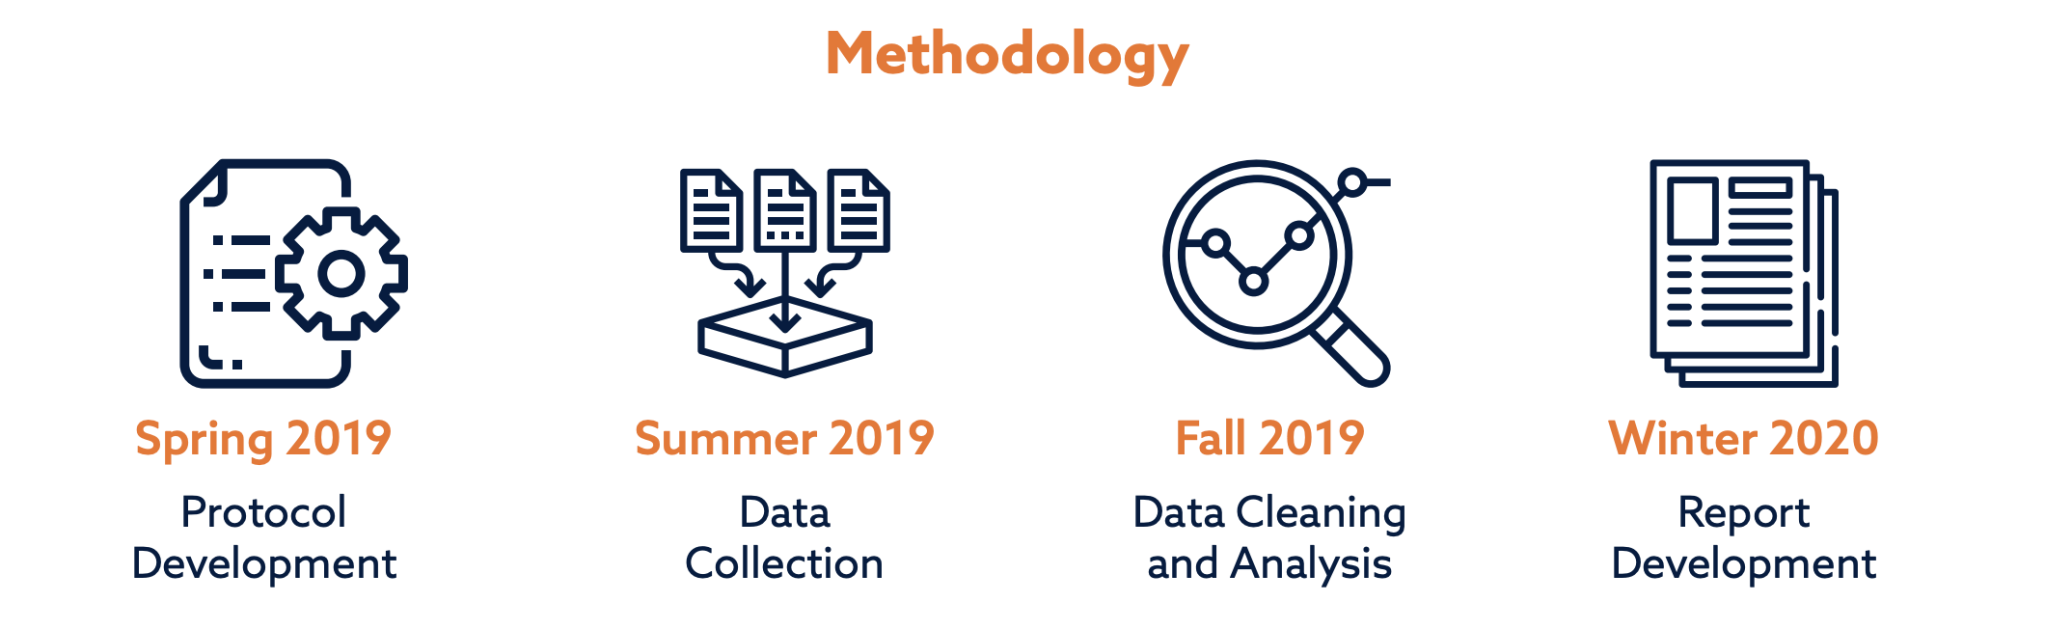 Methodology: Spring 2019 Protocol Development; Summer 2019 Data Collection; Fall 2019 Data Cleaning and Analysis; Winter 2020 Report Development